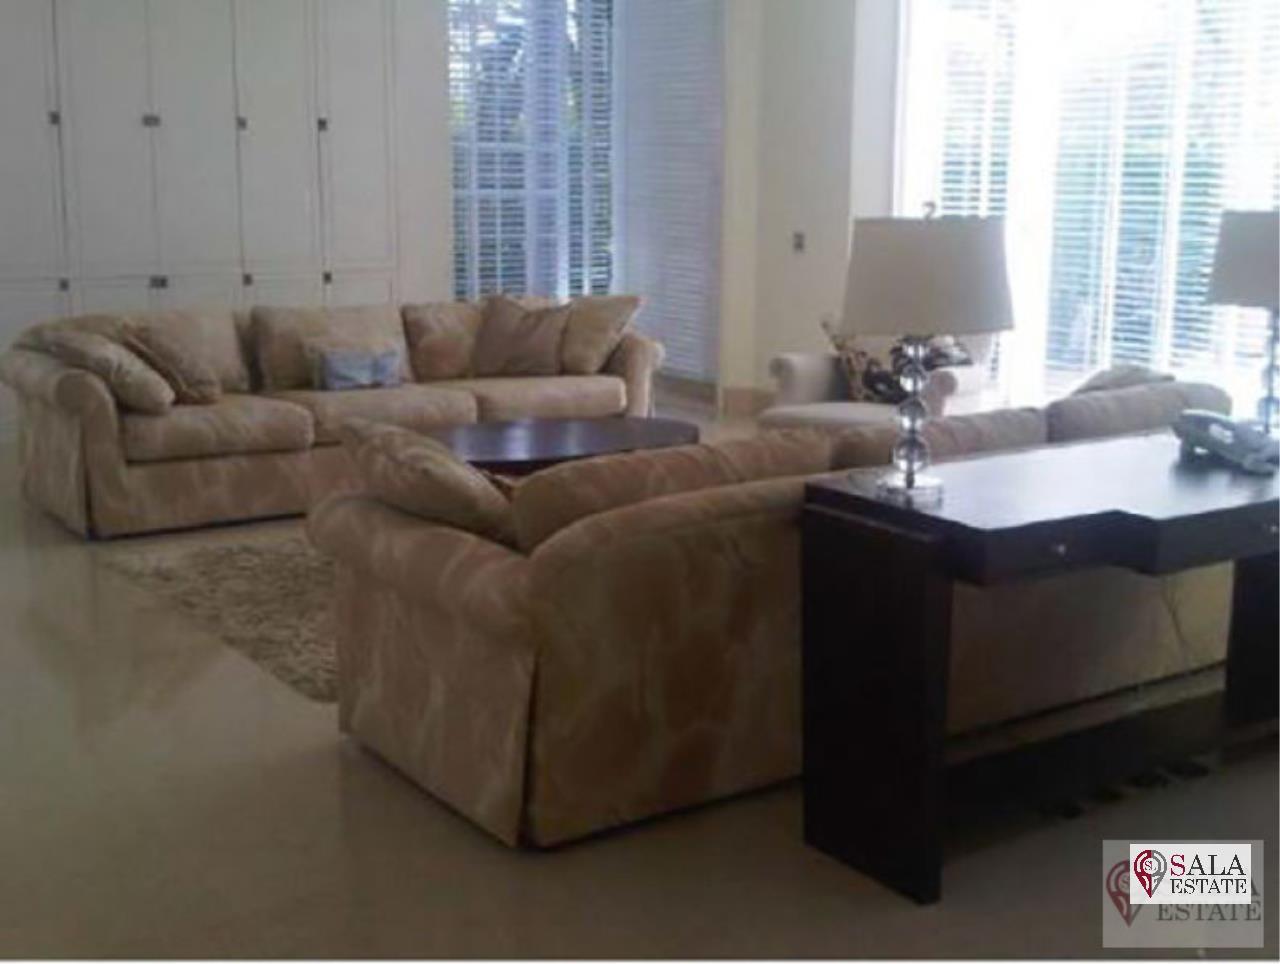 SALA ESTATE Agency's ( FOR RENT / SALE ) LUXURY PRIVATE HOUSE - LAKEWOOD , 3 BEDROOMS 4 BATHROOMS , FULLY FURNISHED 4